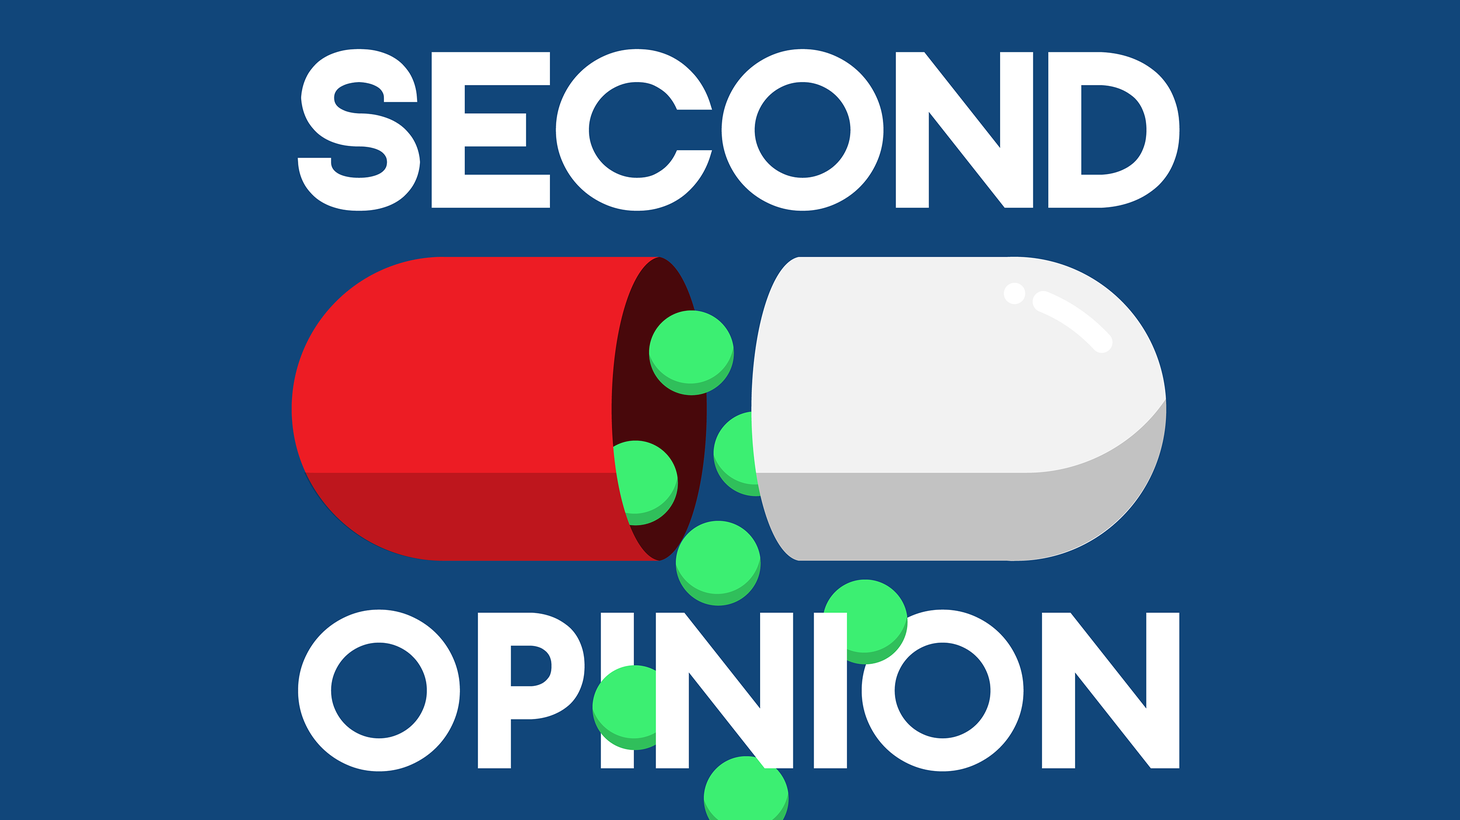 For a variety of different controlled drugs, such as opioids and stimulants, prescriptions are more common in majority white areas. What is the impact of this disparity?